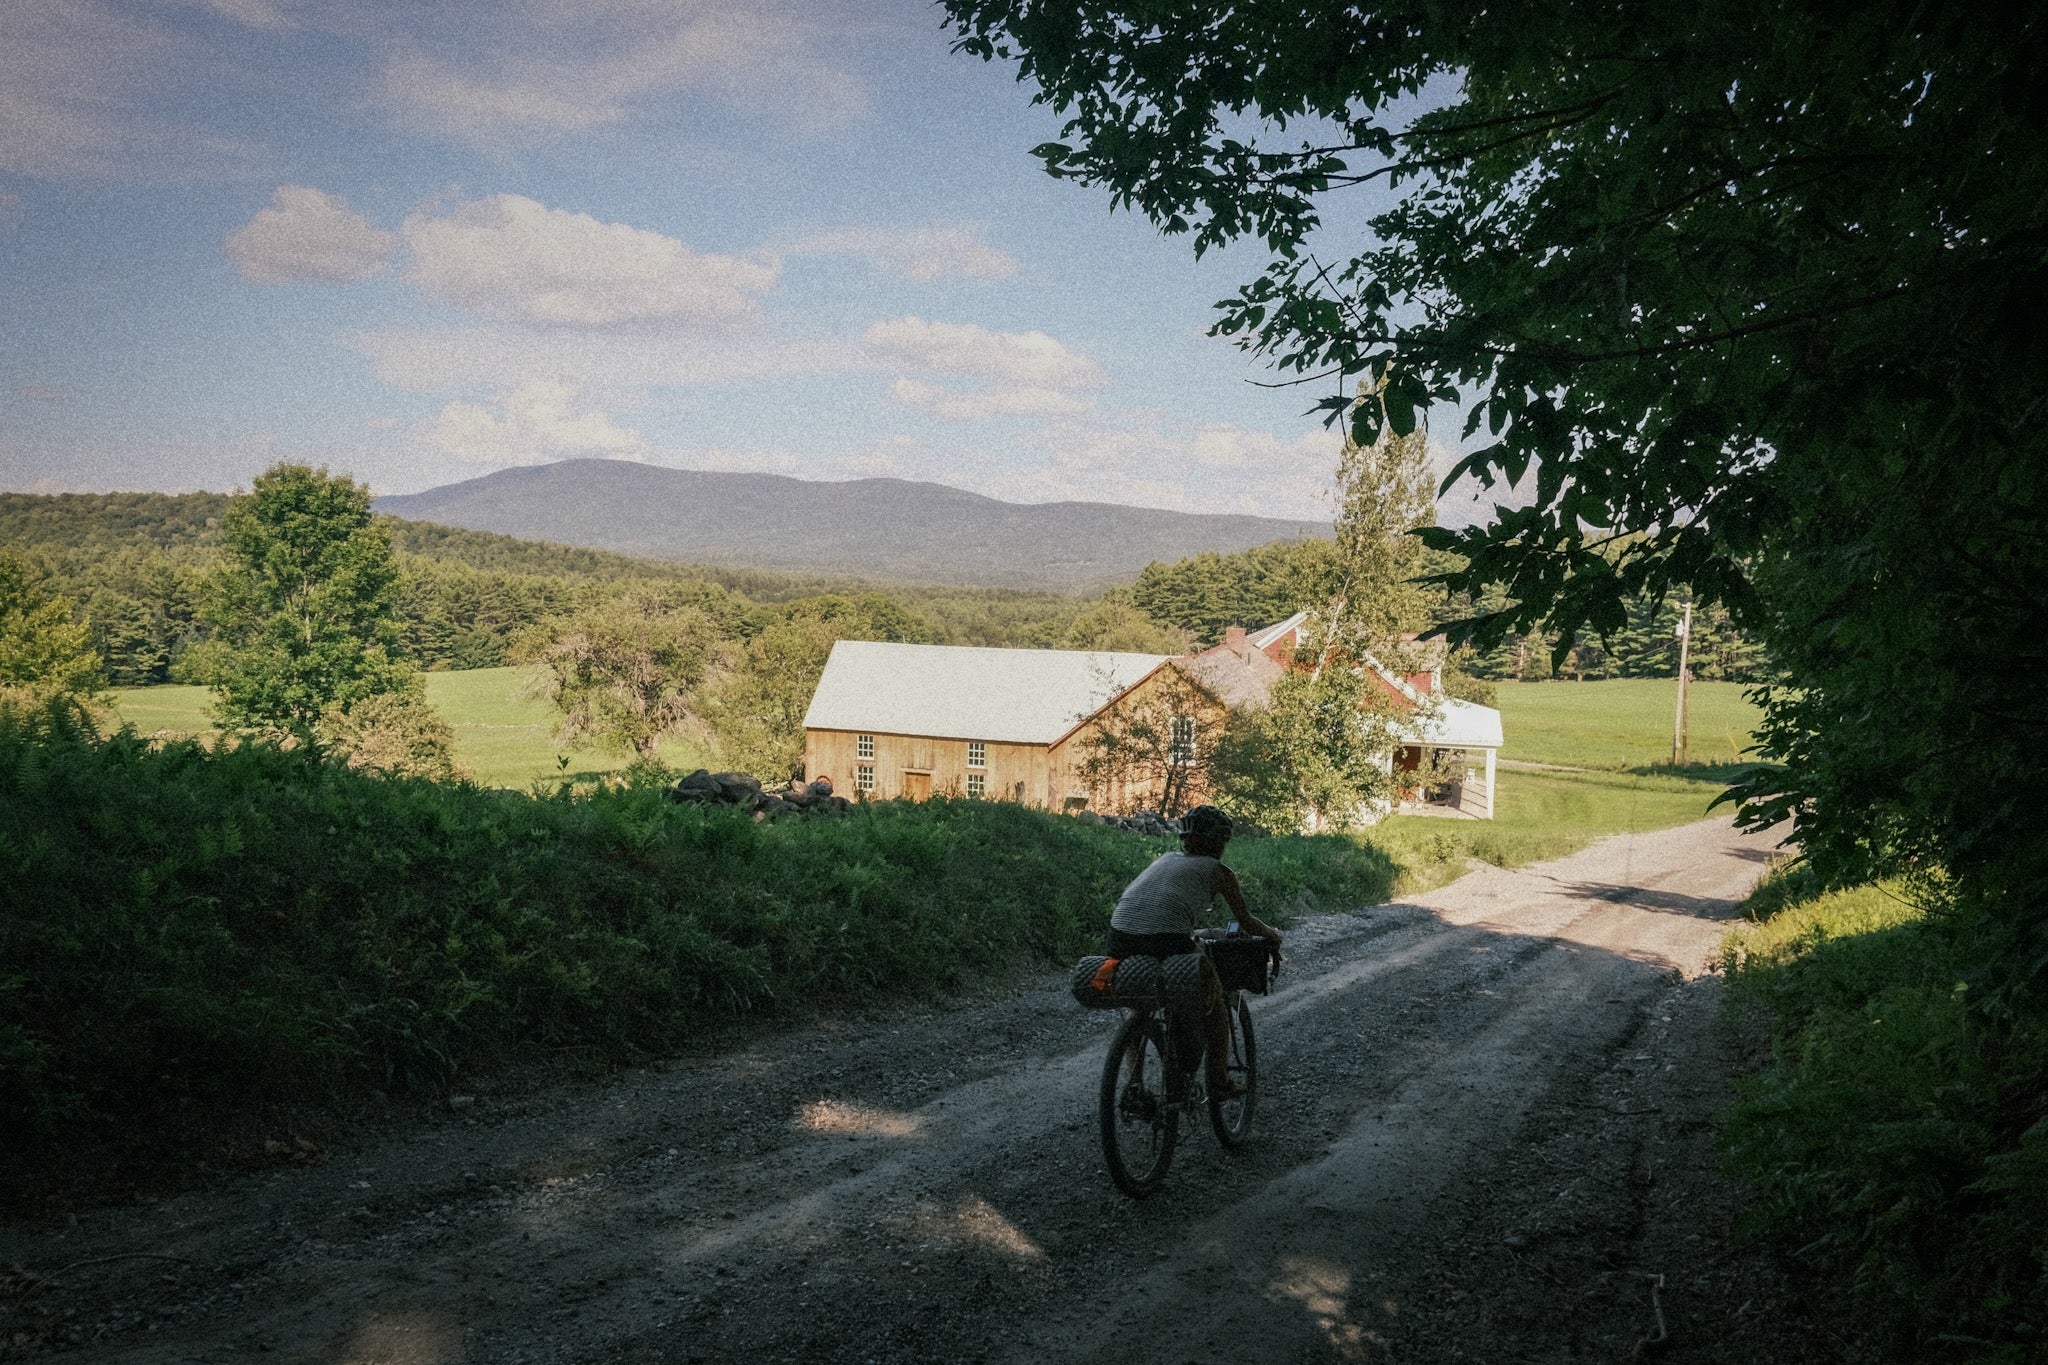 A person riding through the New England countryside wearing adventure sandals passing a barn along a dirt road